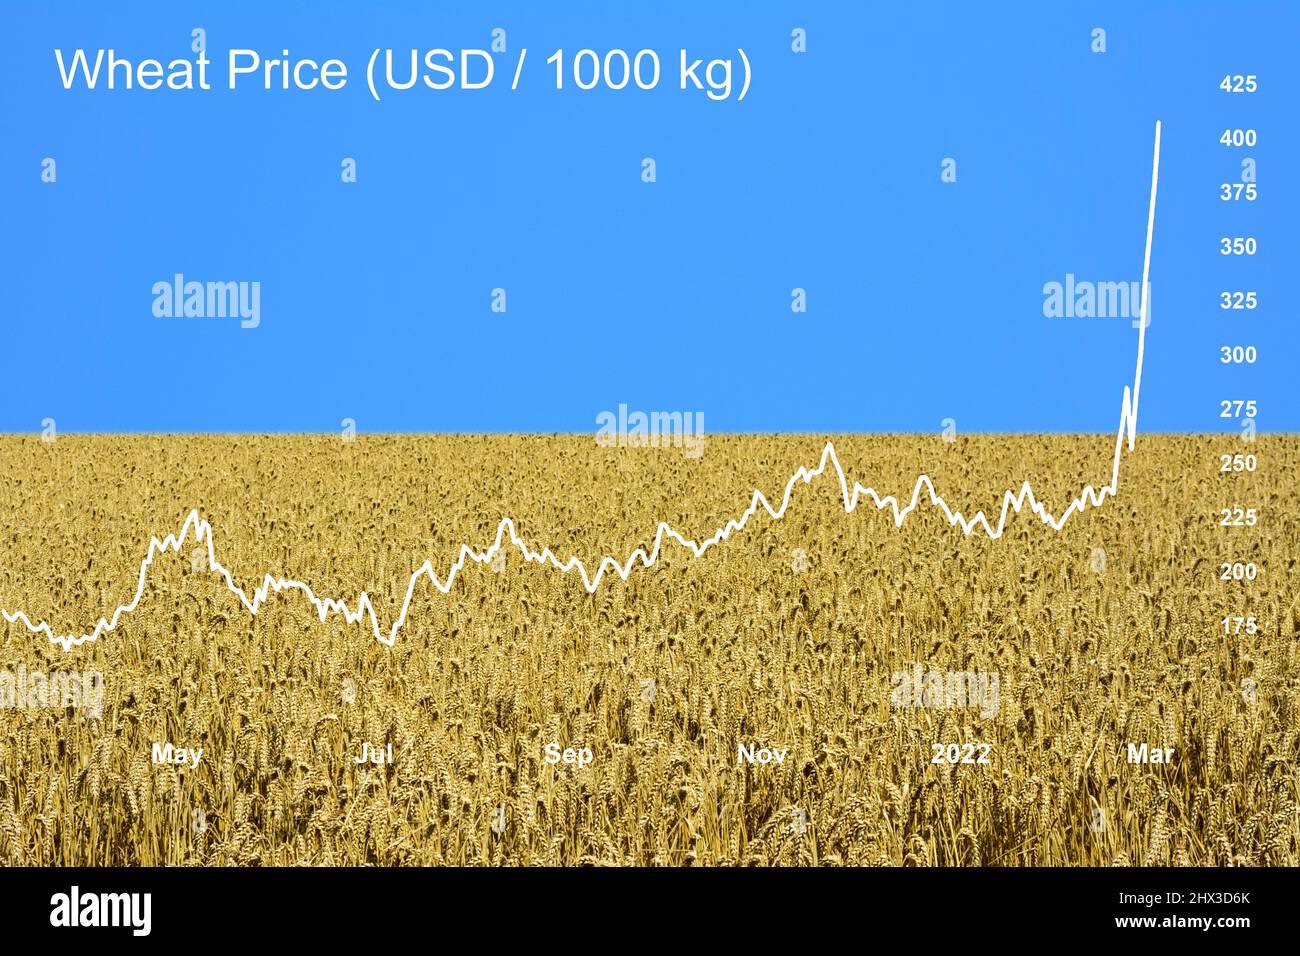 Ukraine. 09 March 2022. Ukraine conflict - Within two weeks of Russia invading Ukraine, wheat prices have risen by almost 50% to reach a 14-year high, putting pressure on world food prices. Wheat production in Ukraine and Russia accounts for 30% of world wheat exports. (Wheat price chart superimposed on an image of a wheat field with a clear blue sky, representing the Ukrainian flag). Credit: Alison Eckett / Alamy Stock Photo